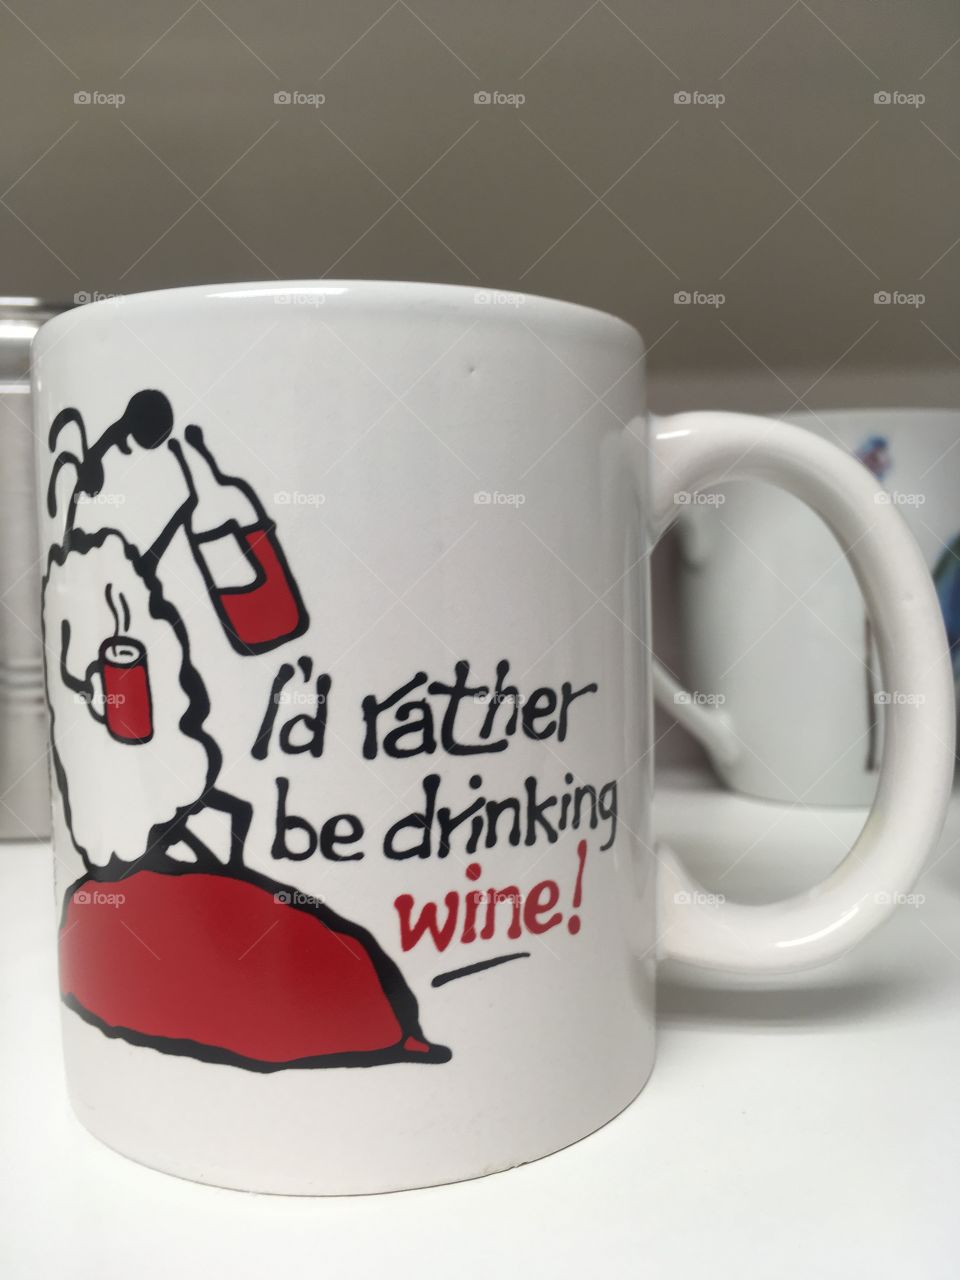 Coffee mug with wording that is exclaiming to rather be drinking wine